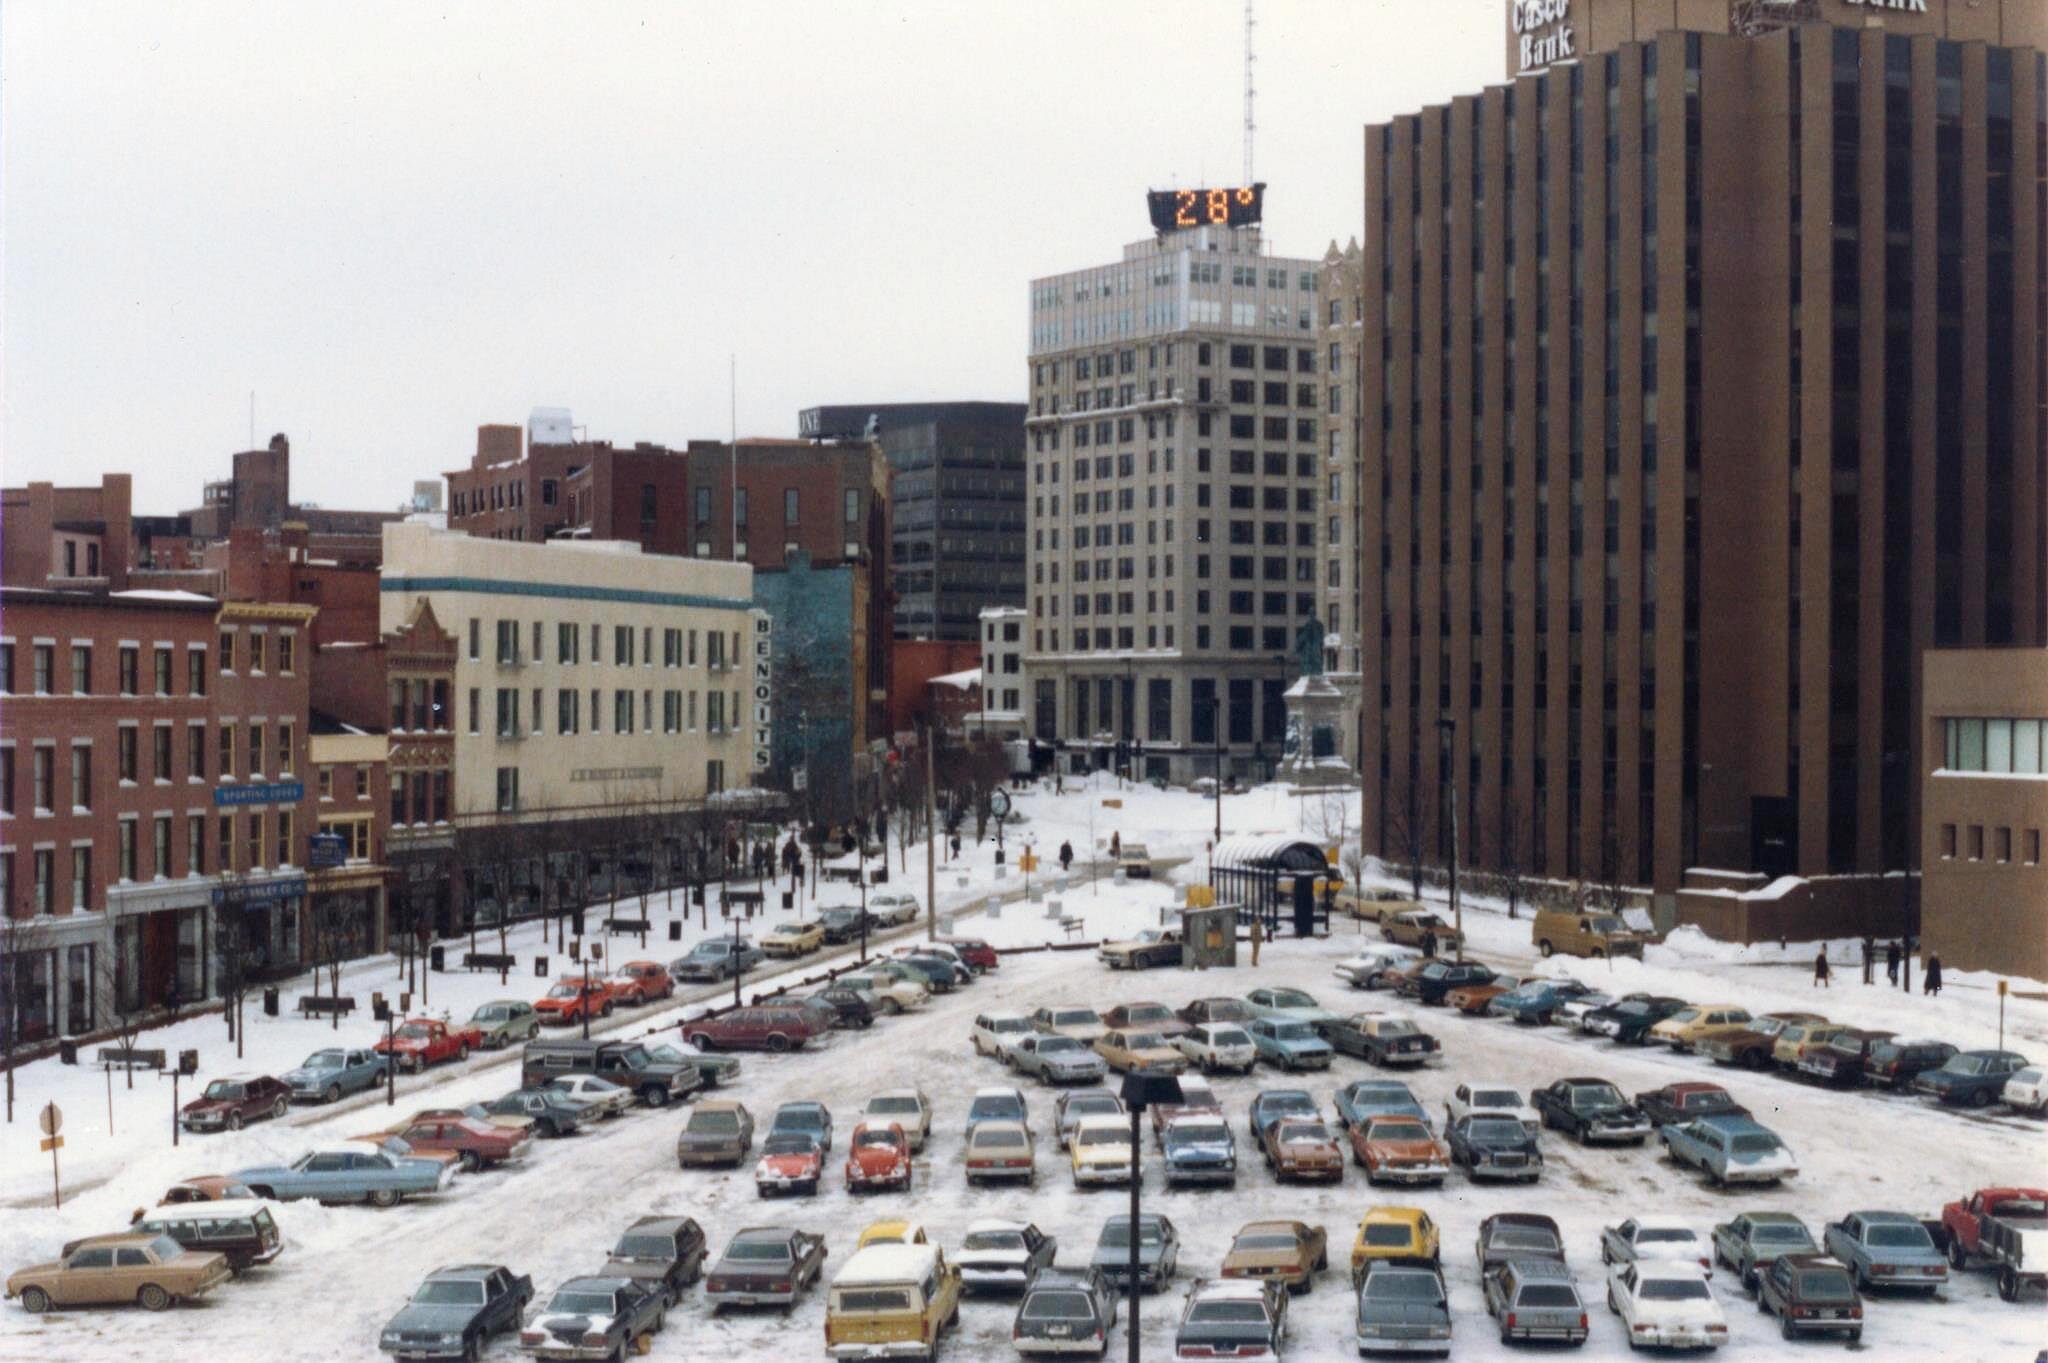 The Golden Triangle looking west toward Monument Square (Image: Rob Michael)